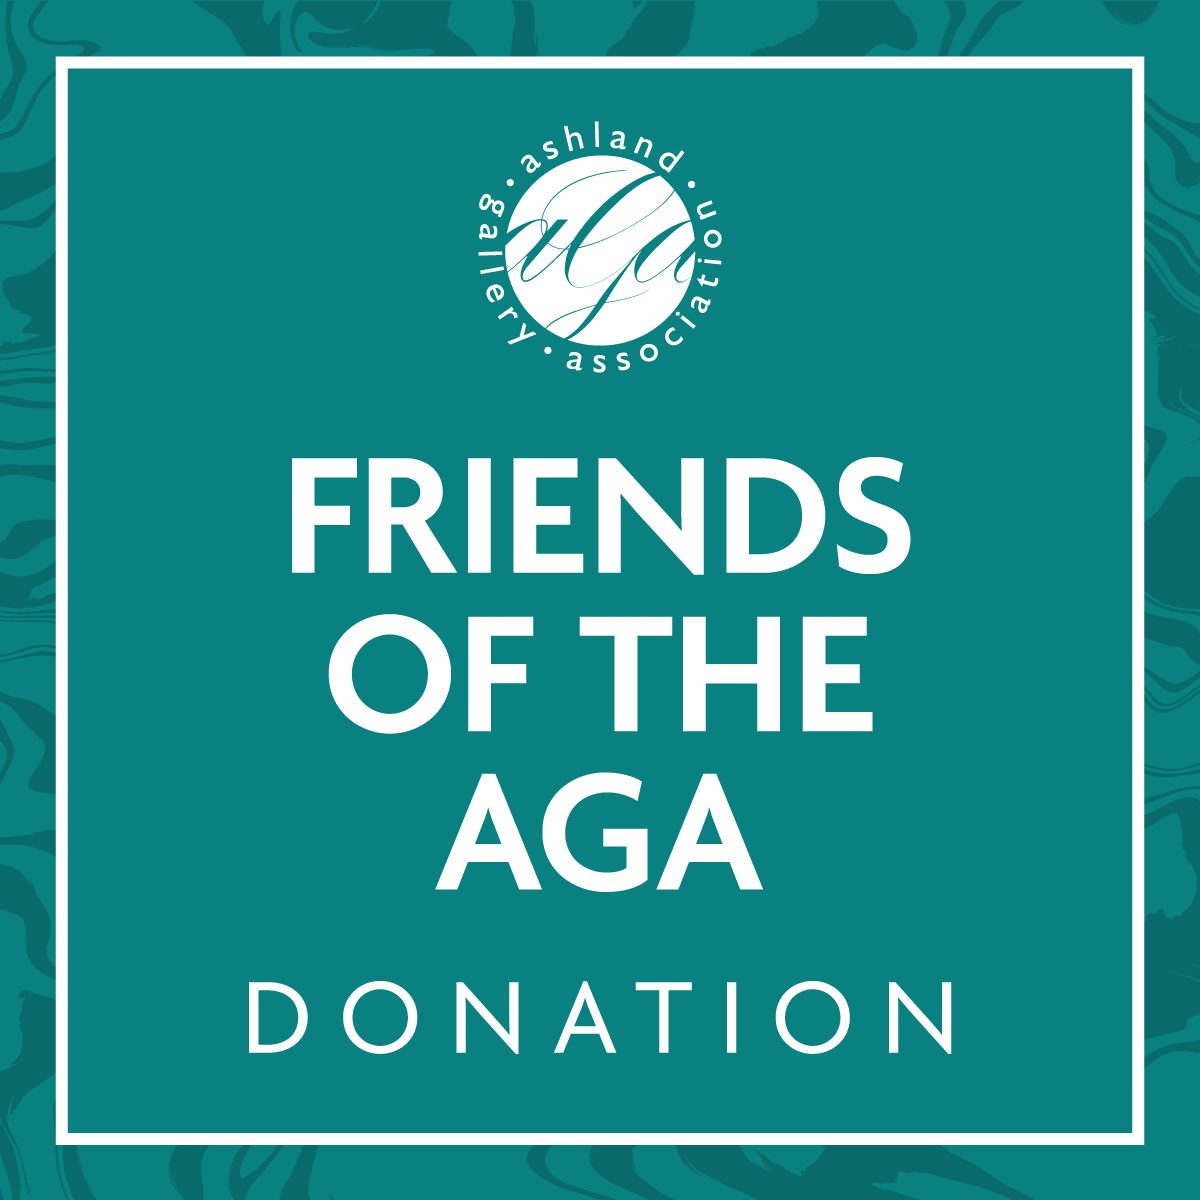 Friends of the AGA